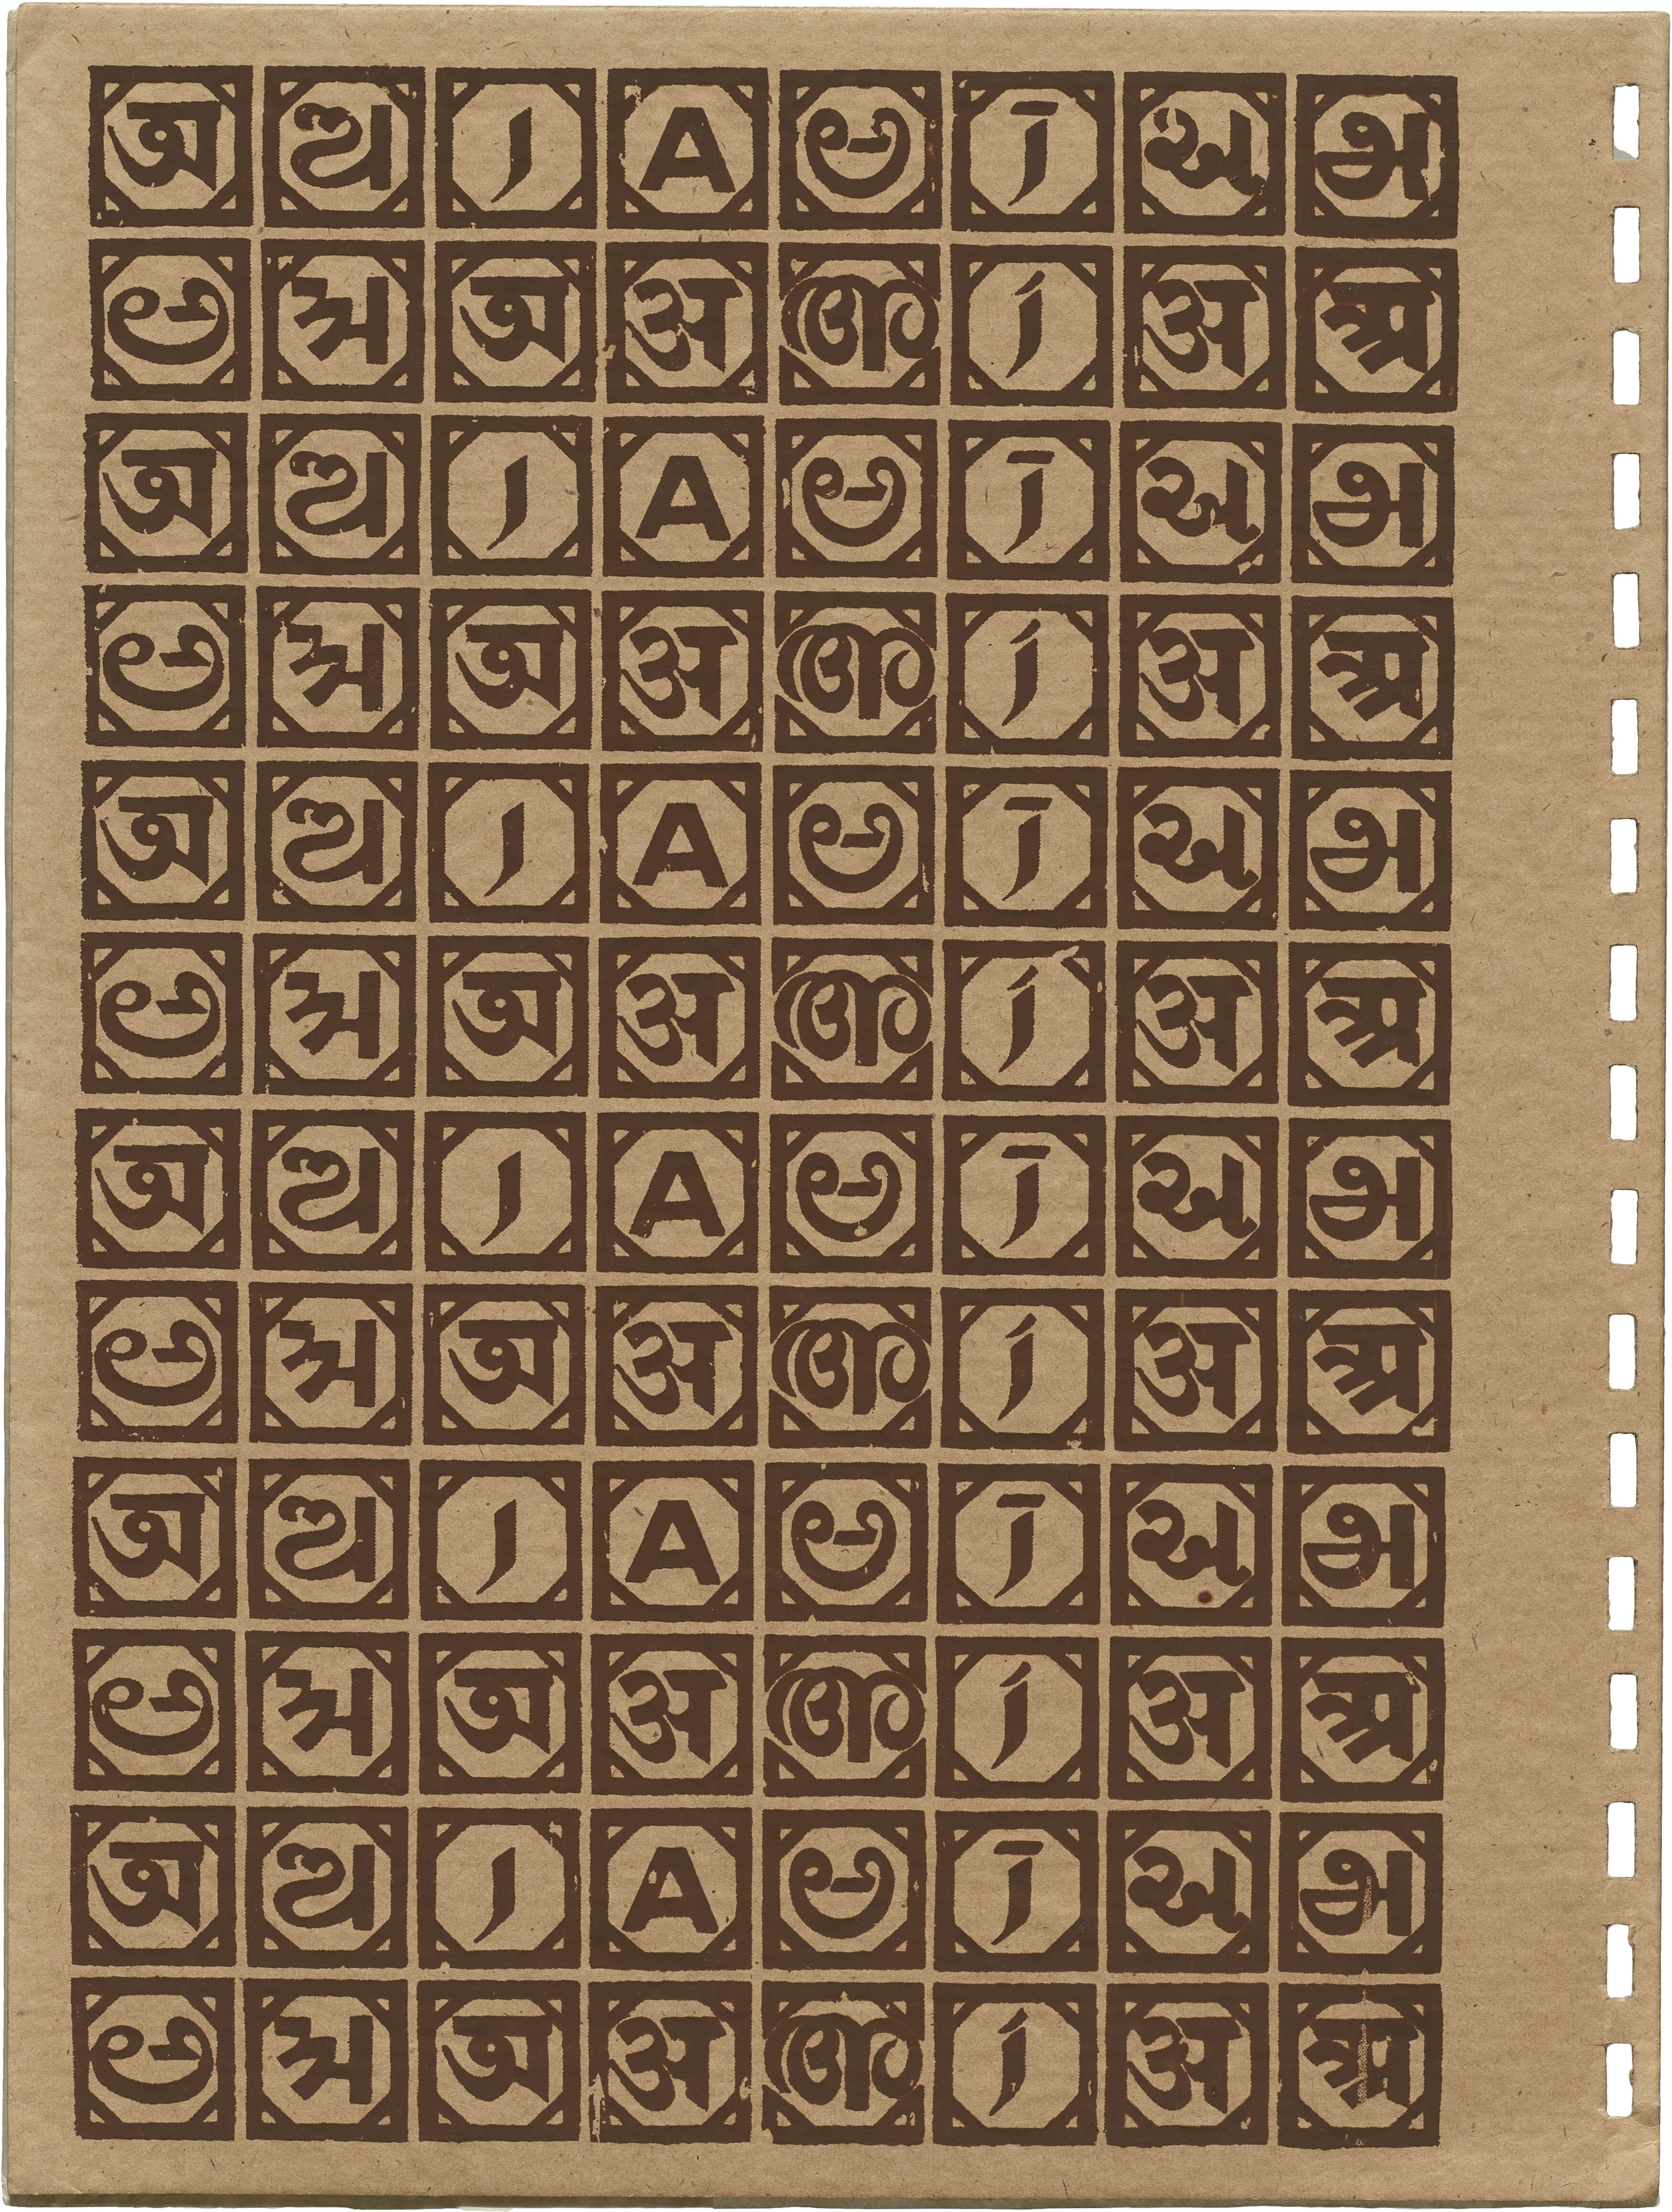 Assembly of symbols from the ancient Indus civilization, dating back to 2500–3000 BCE.